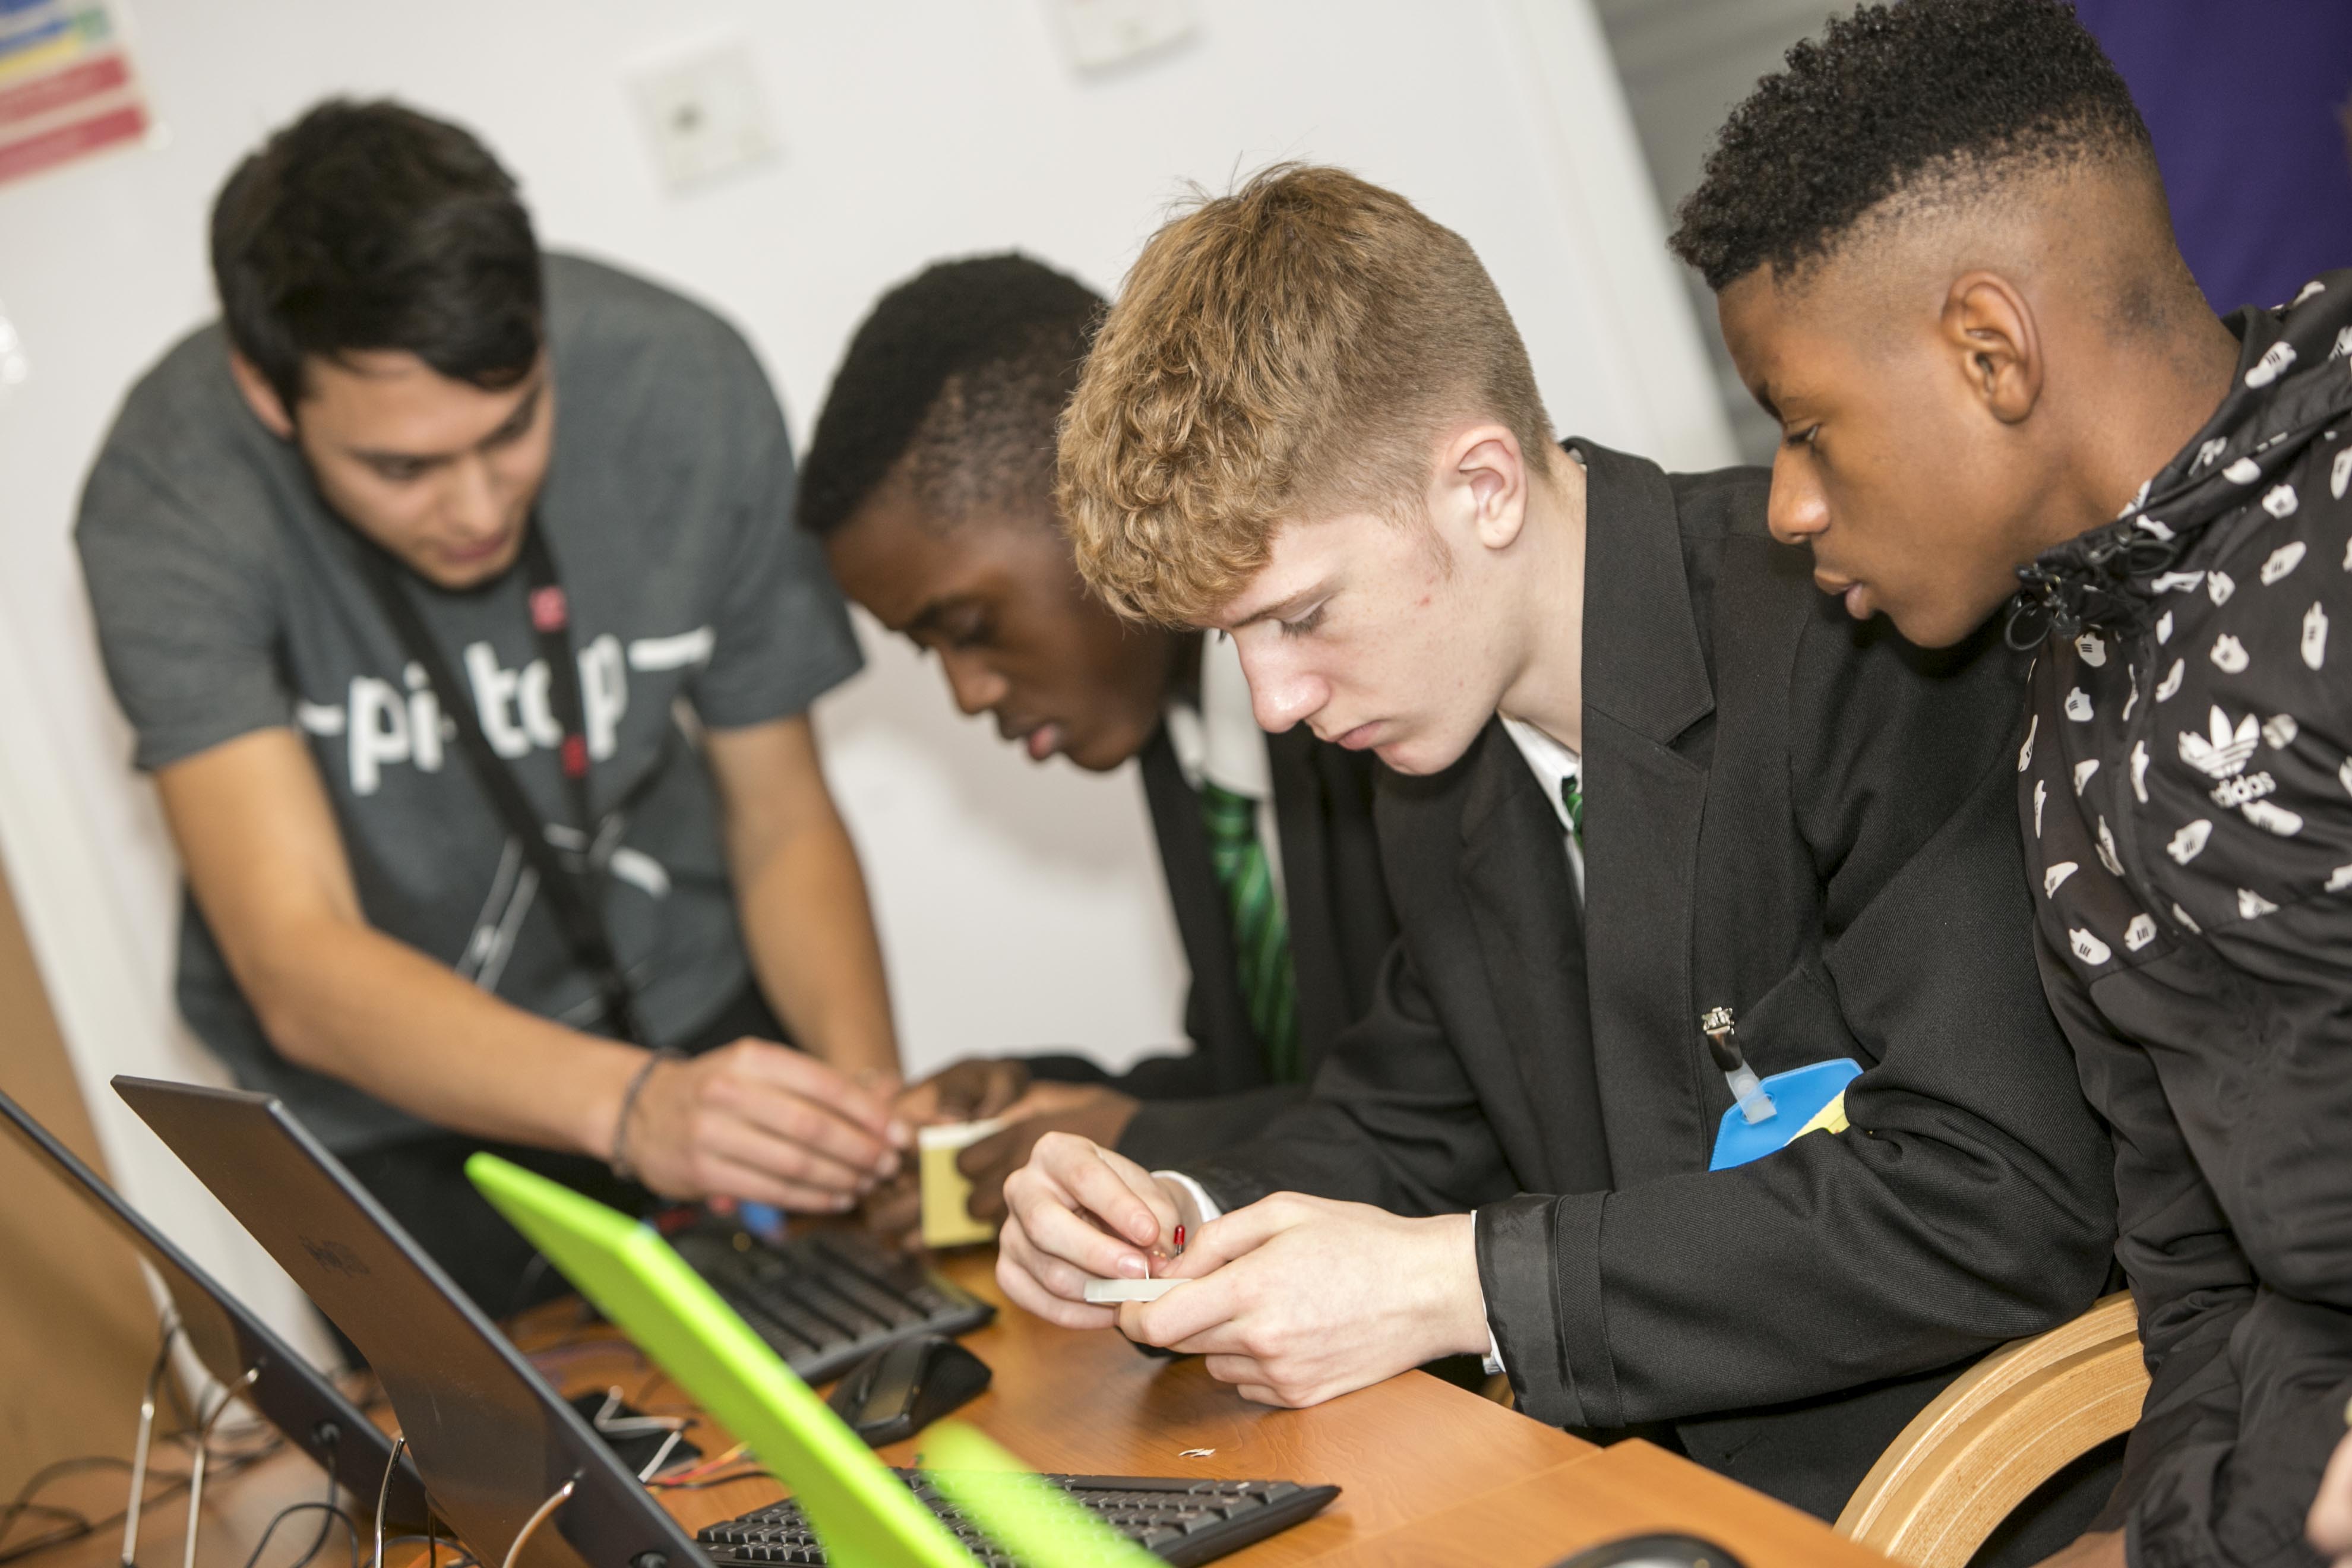 School pupils at the Tomorrow's Engineers event